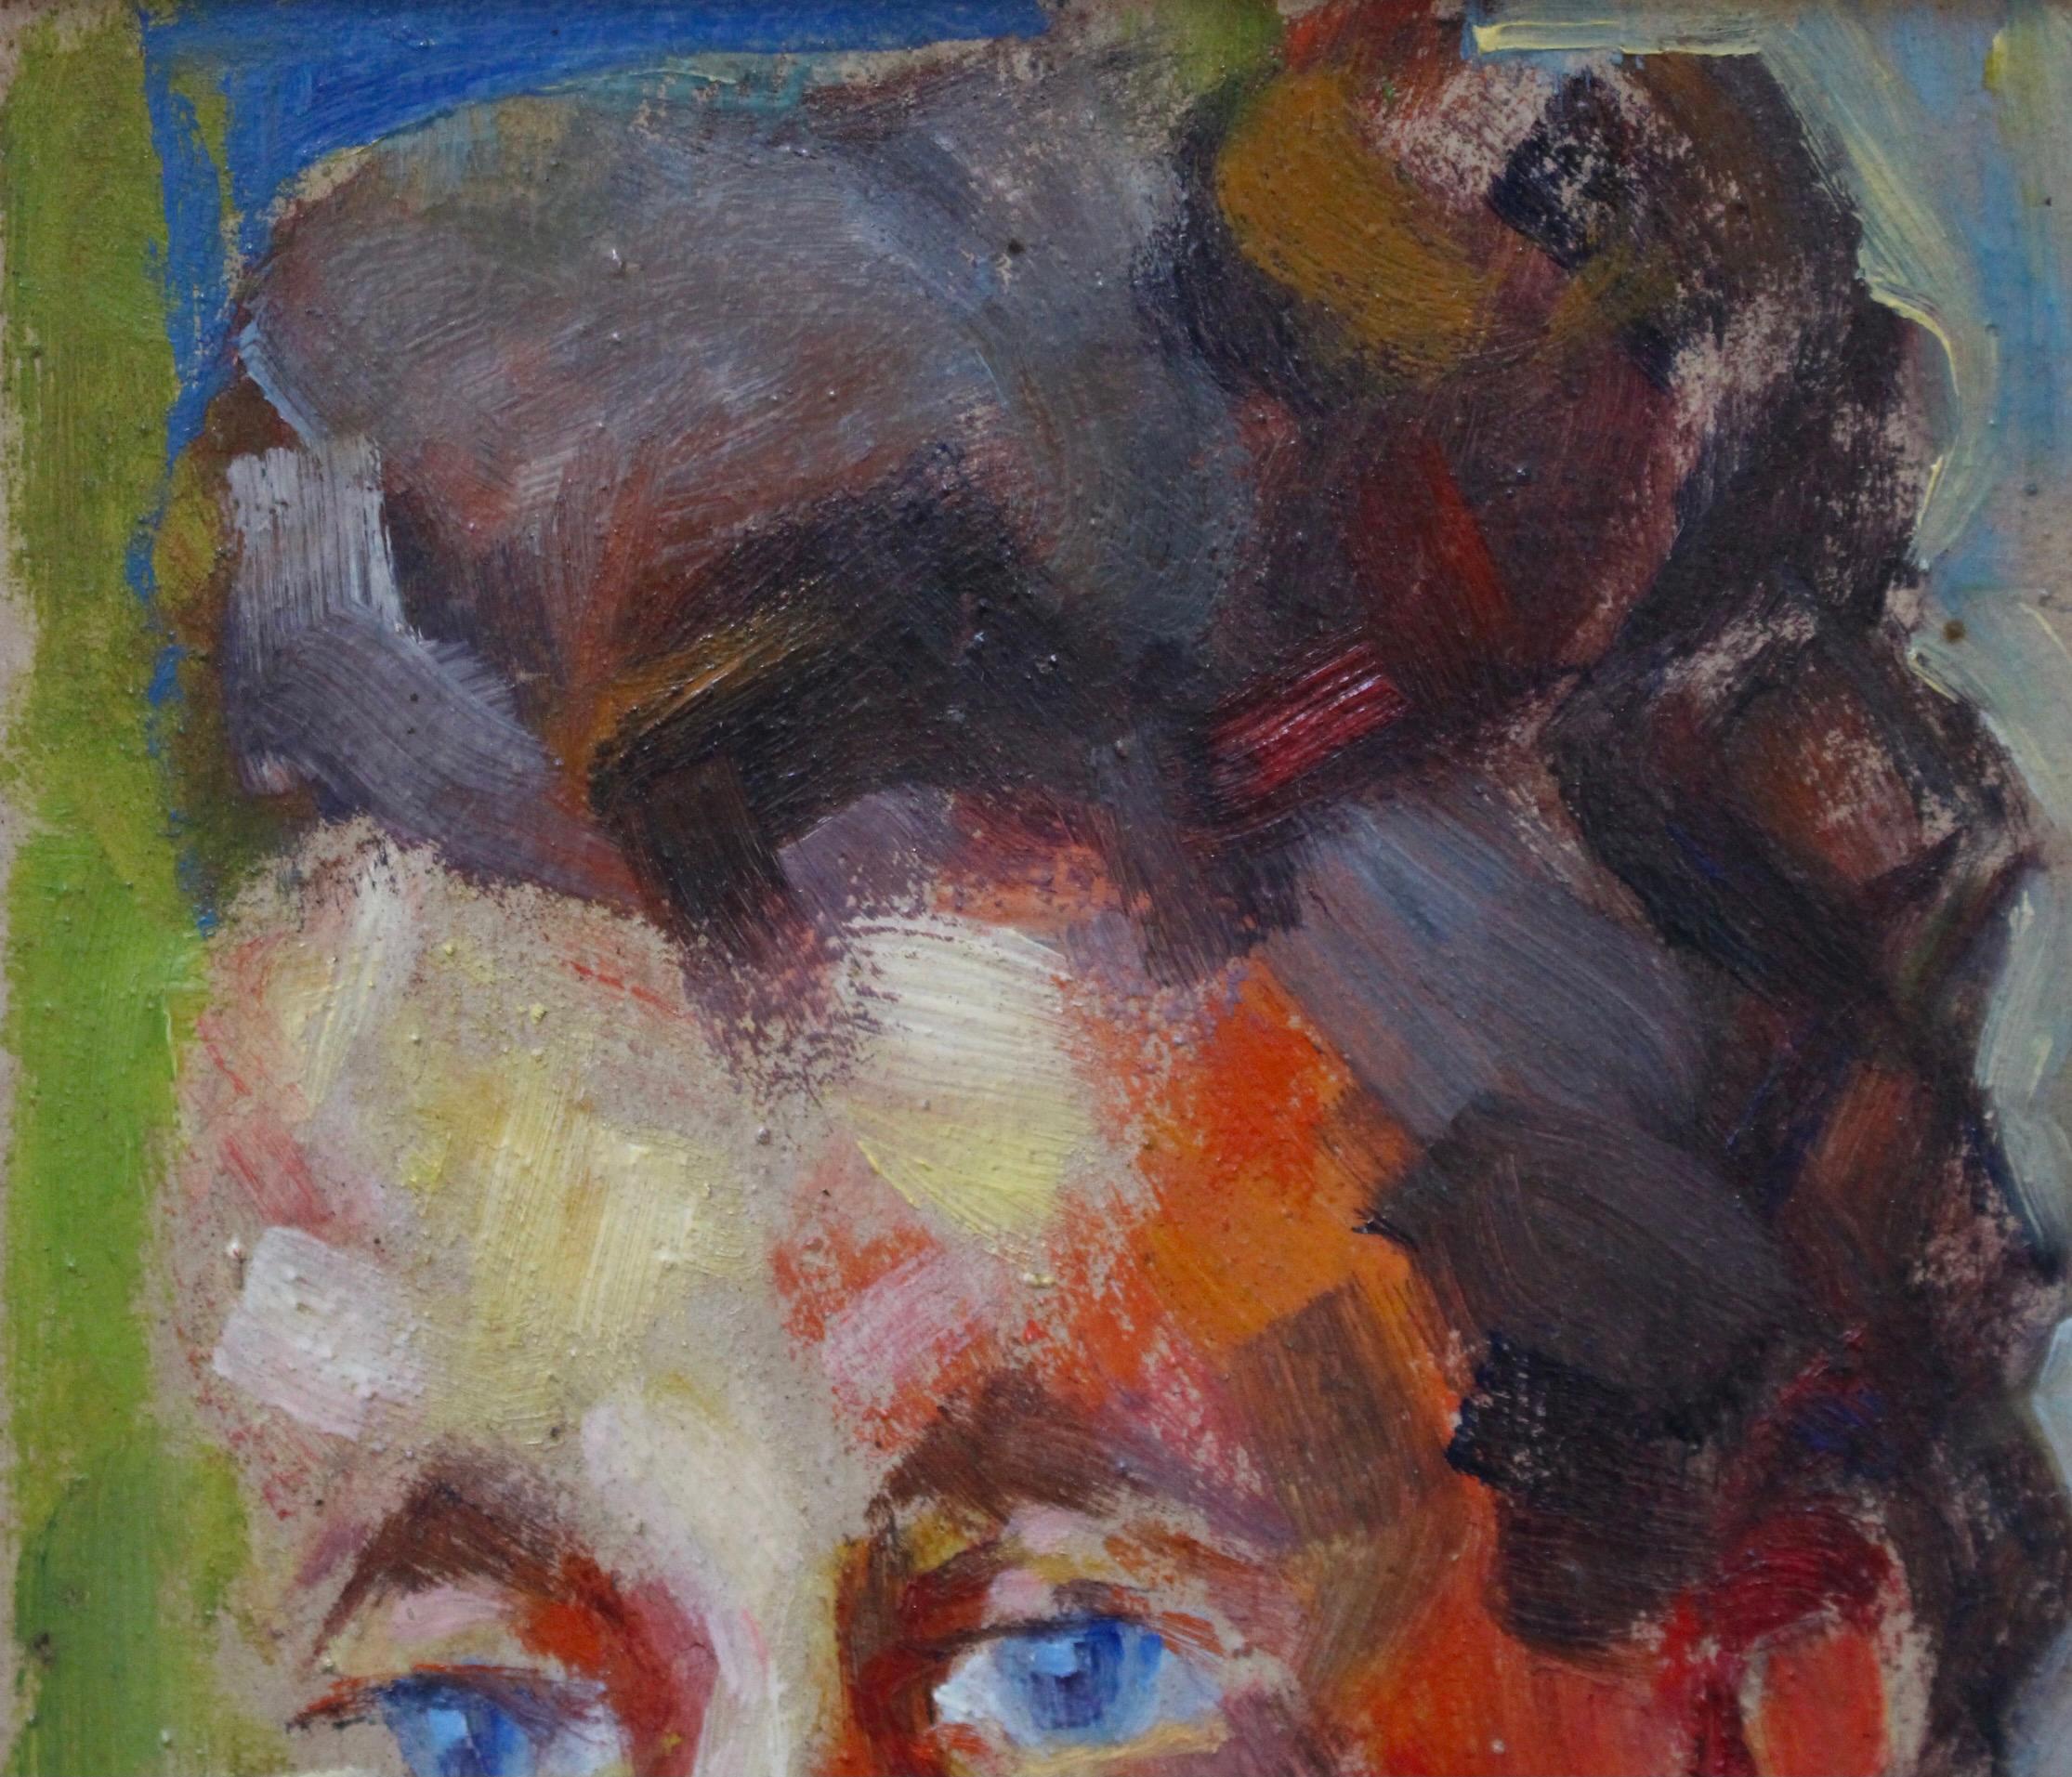 'Portrait of Blue-Eyed Woman', oil on board, signed by artist, Ayral, French School (circa 1960s). Discovered in the South of France, this small portrait is painted with vibrant colours and bold strokes. It may be a self-portrait of the artist